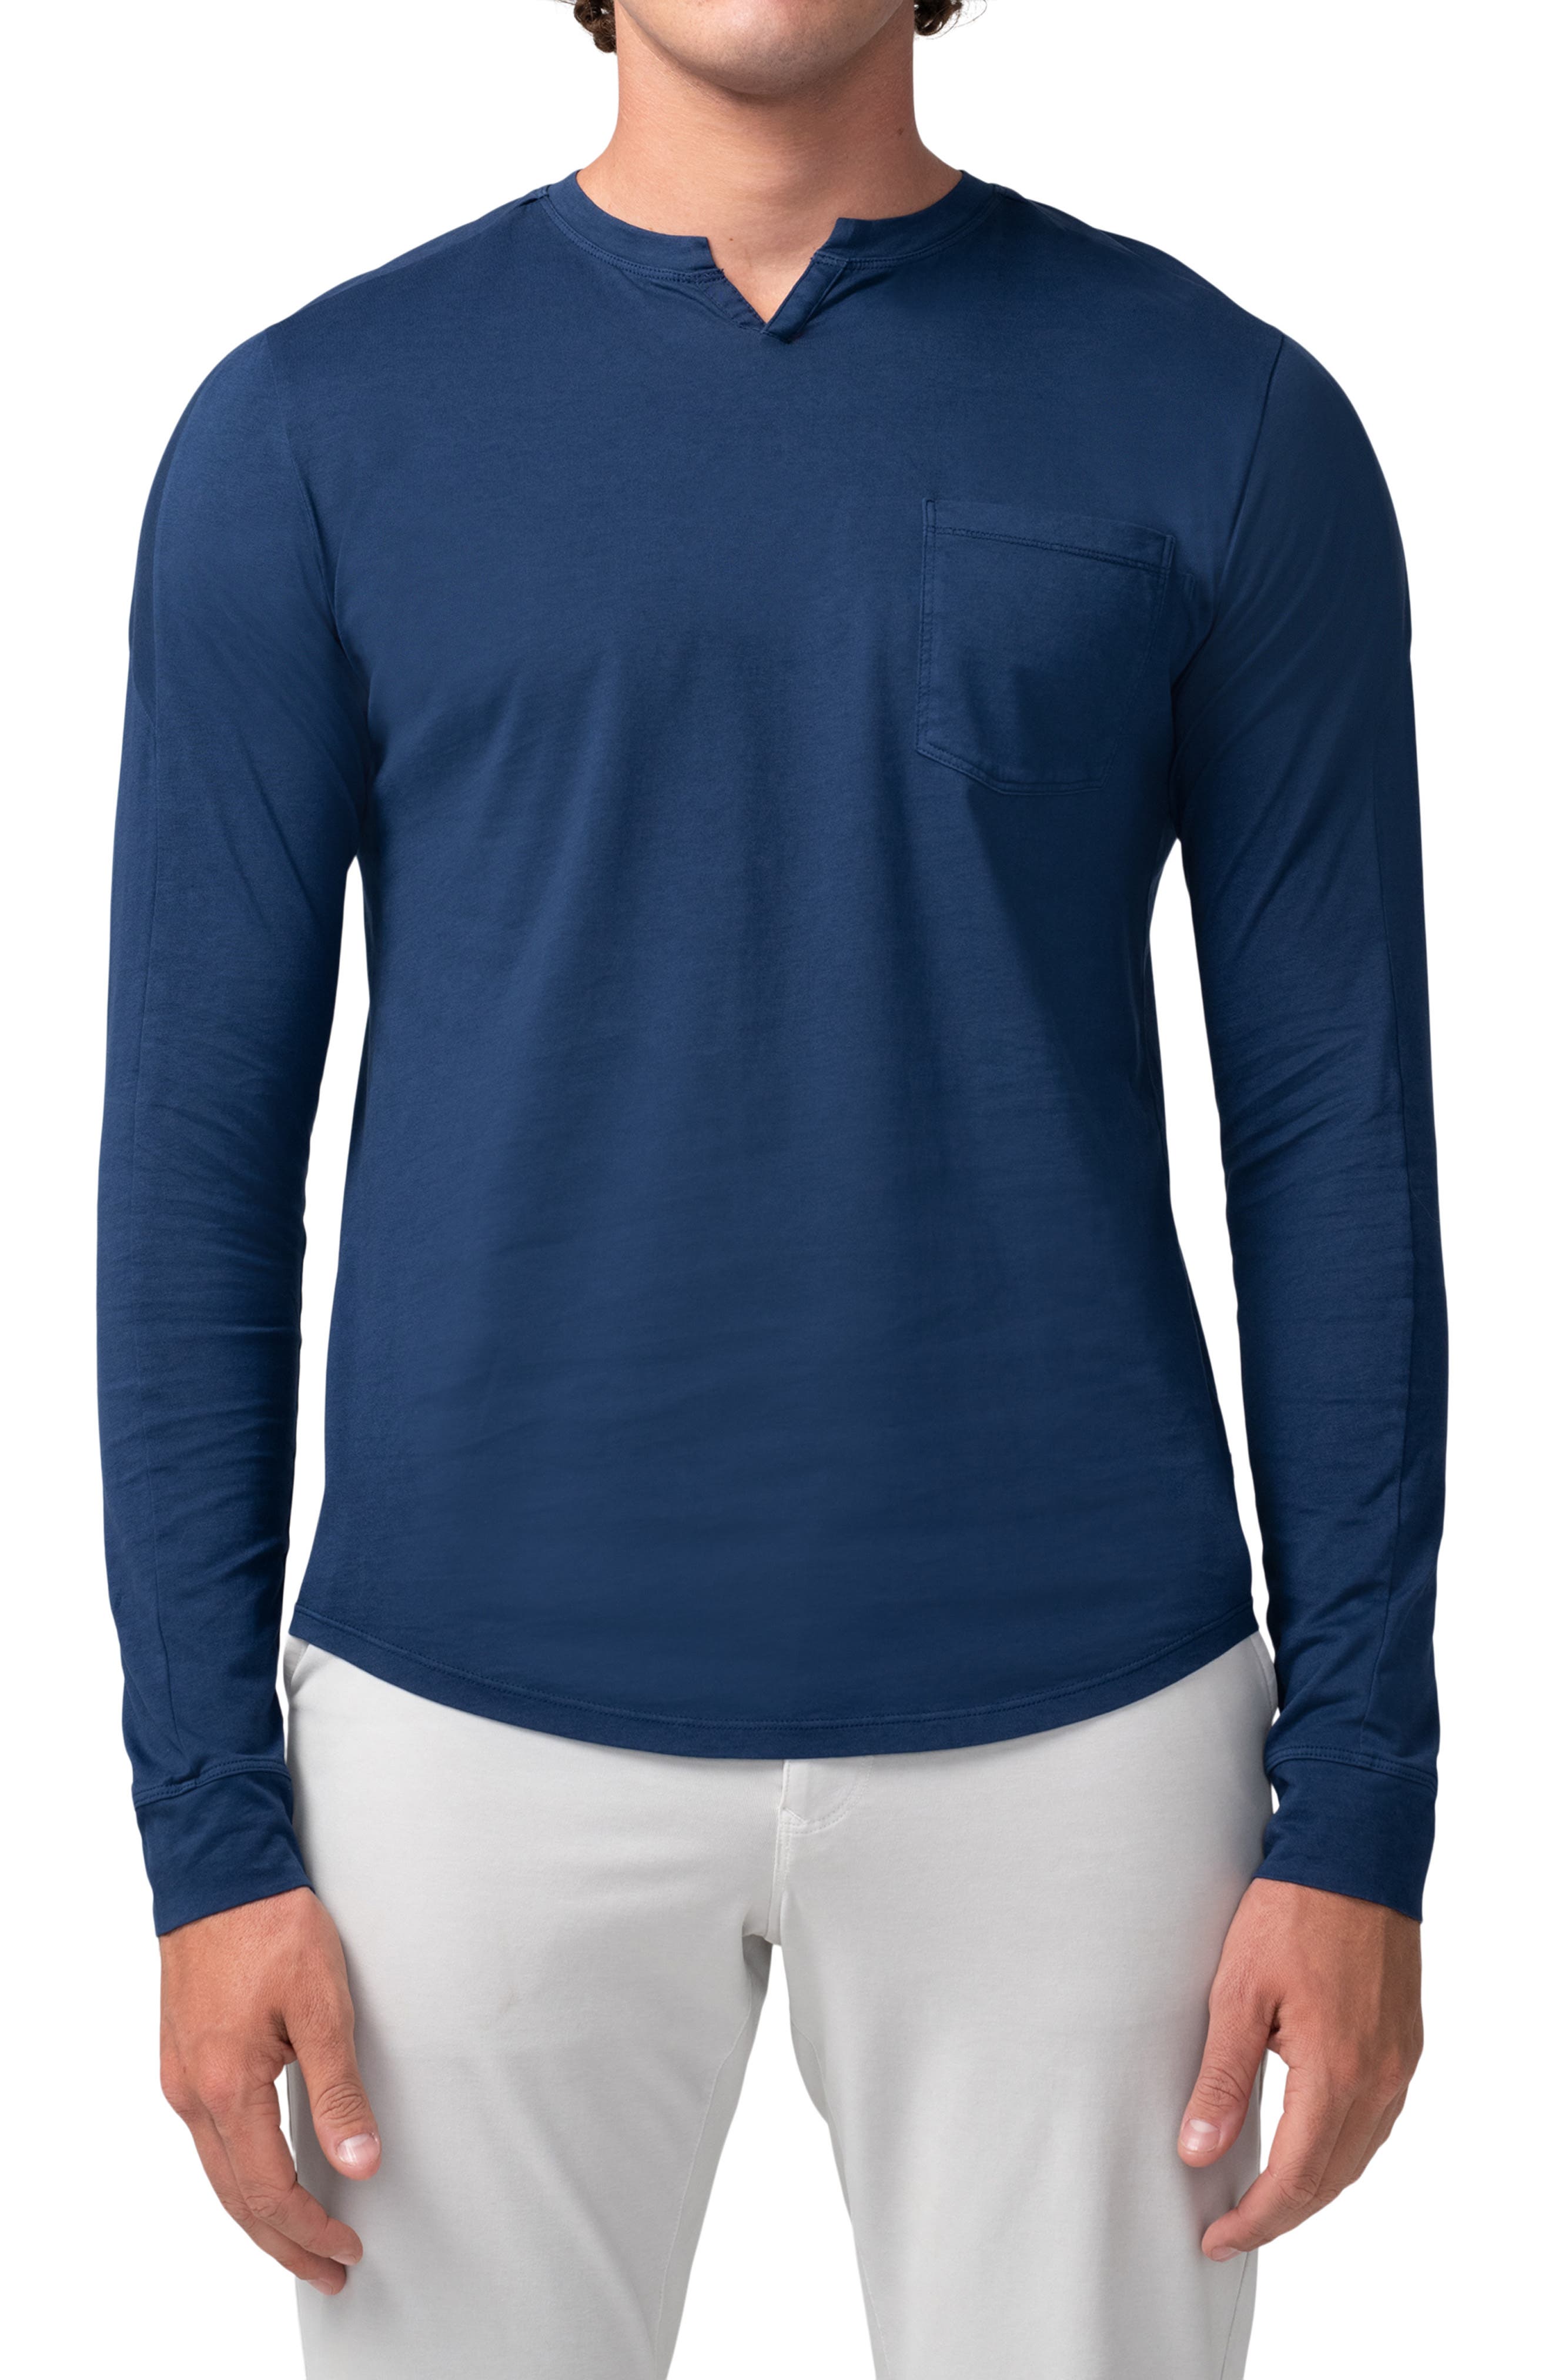 100% Cotton V-Neck Lower East Long-Sleeved Mens Shirts Pack of 5